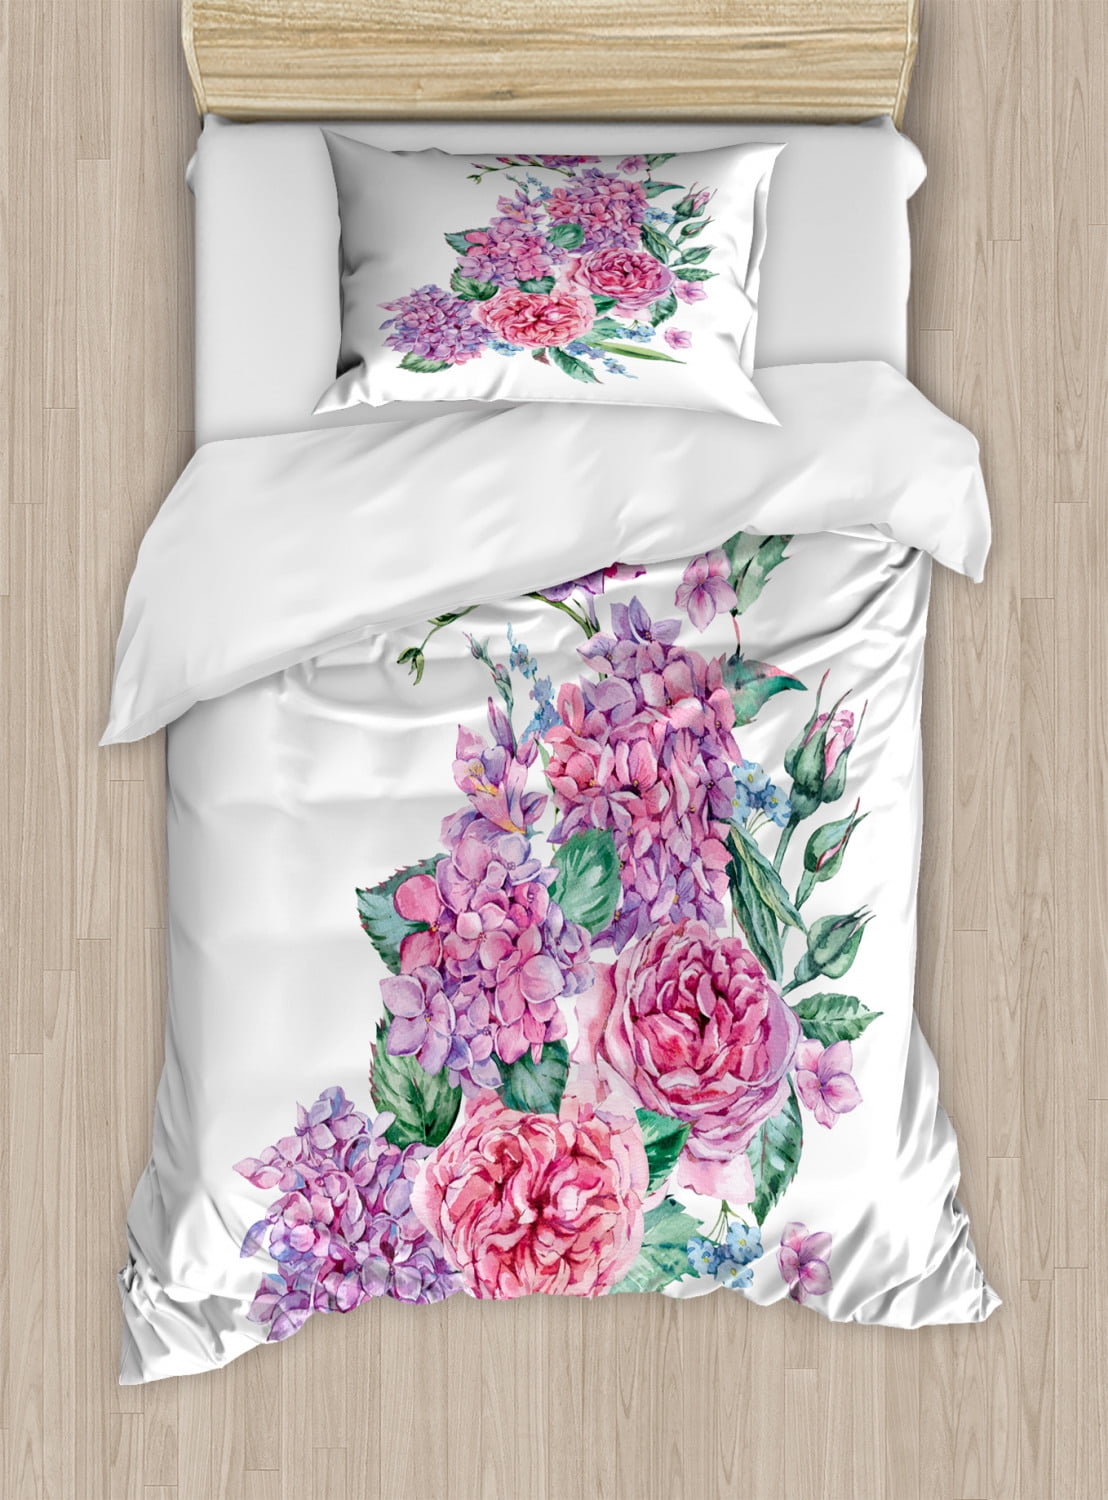 Hydrangea Duvet Cover Set, Colorful Watercolor Beauty with Blooming ...